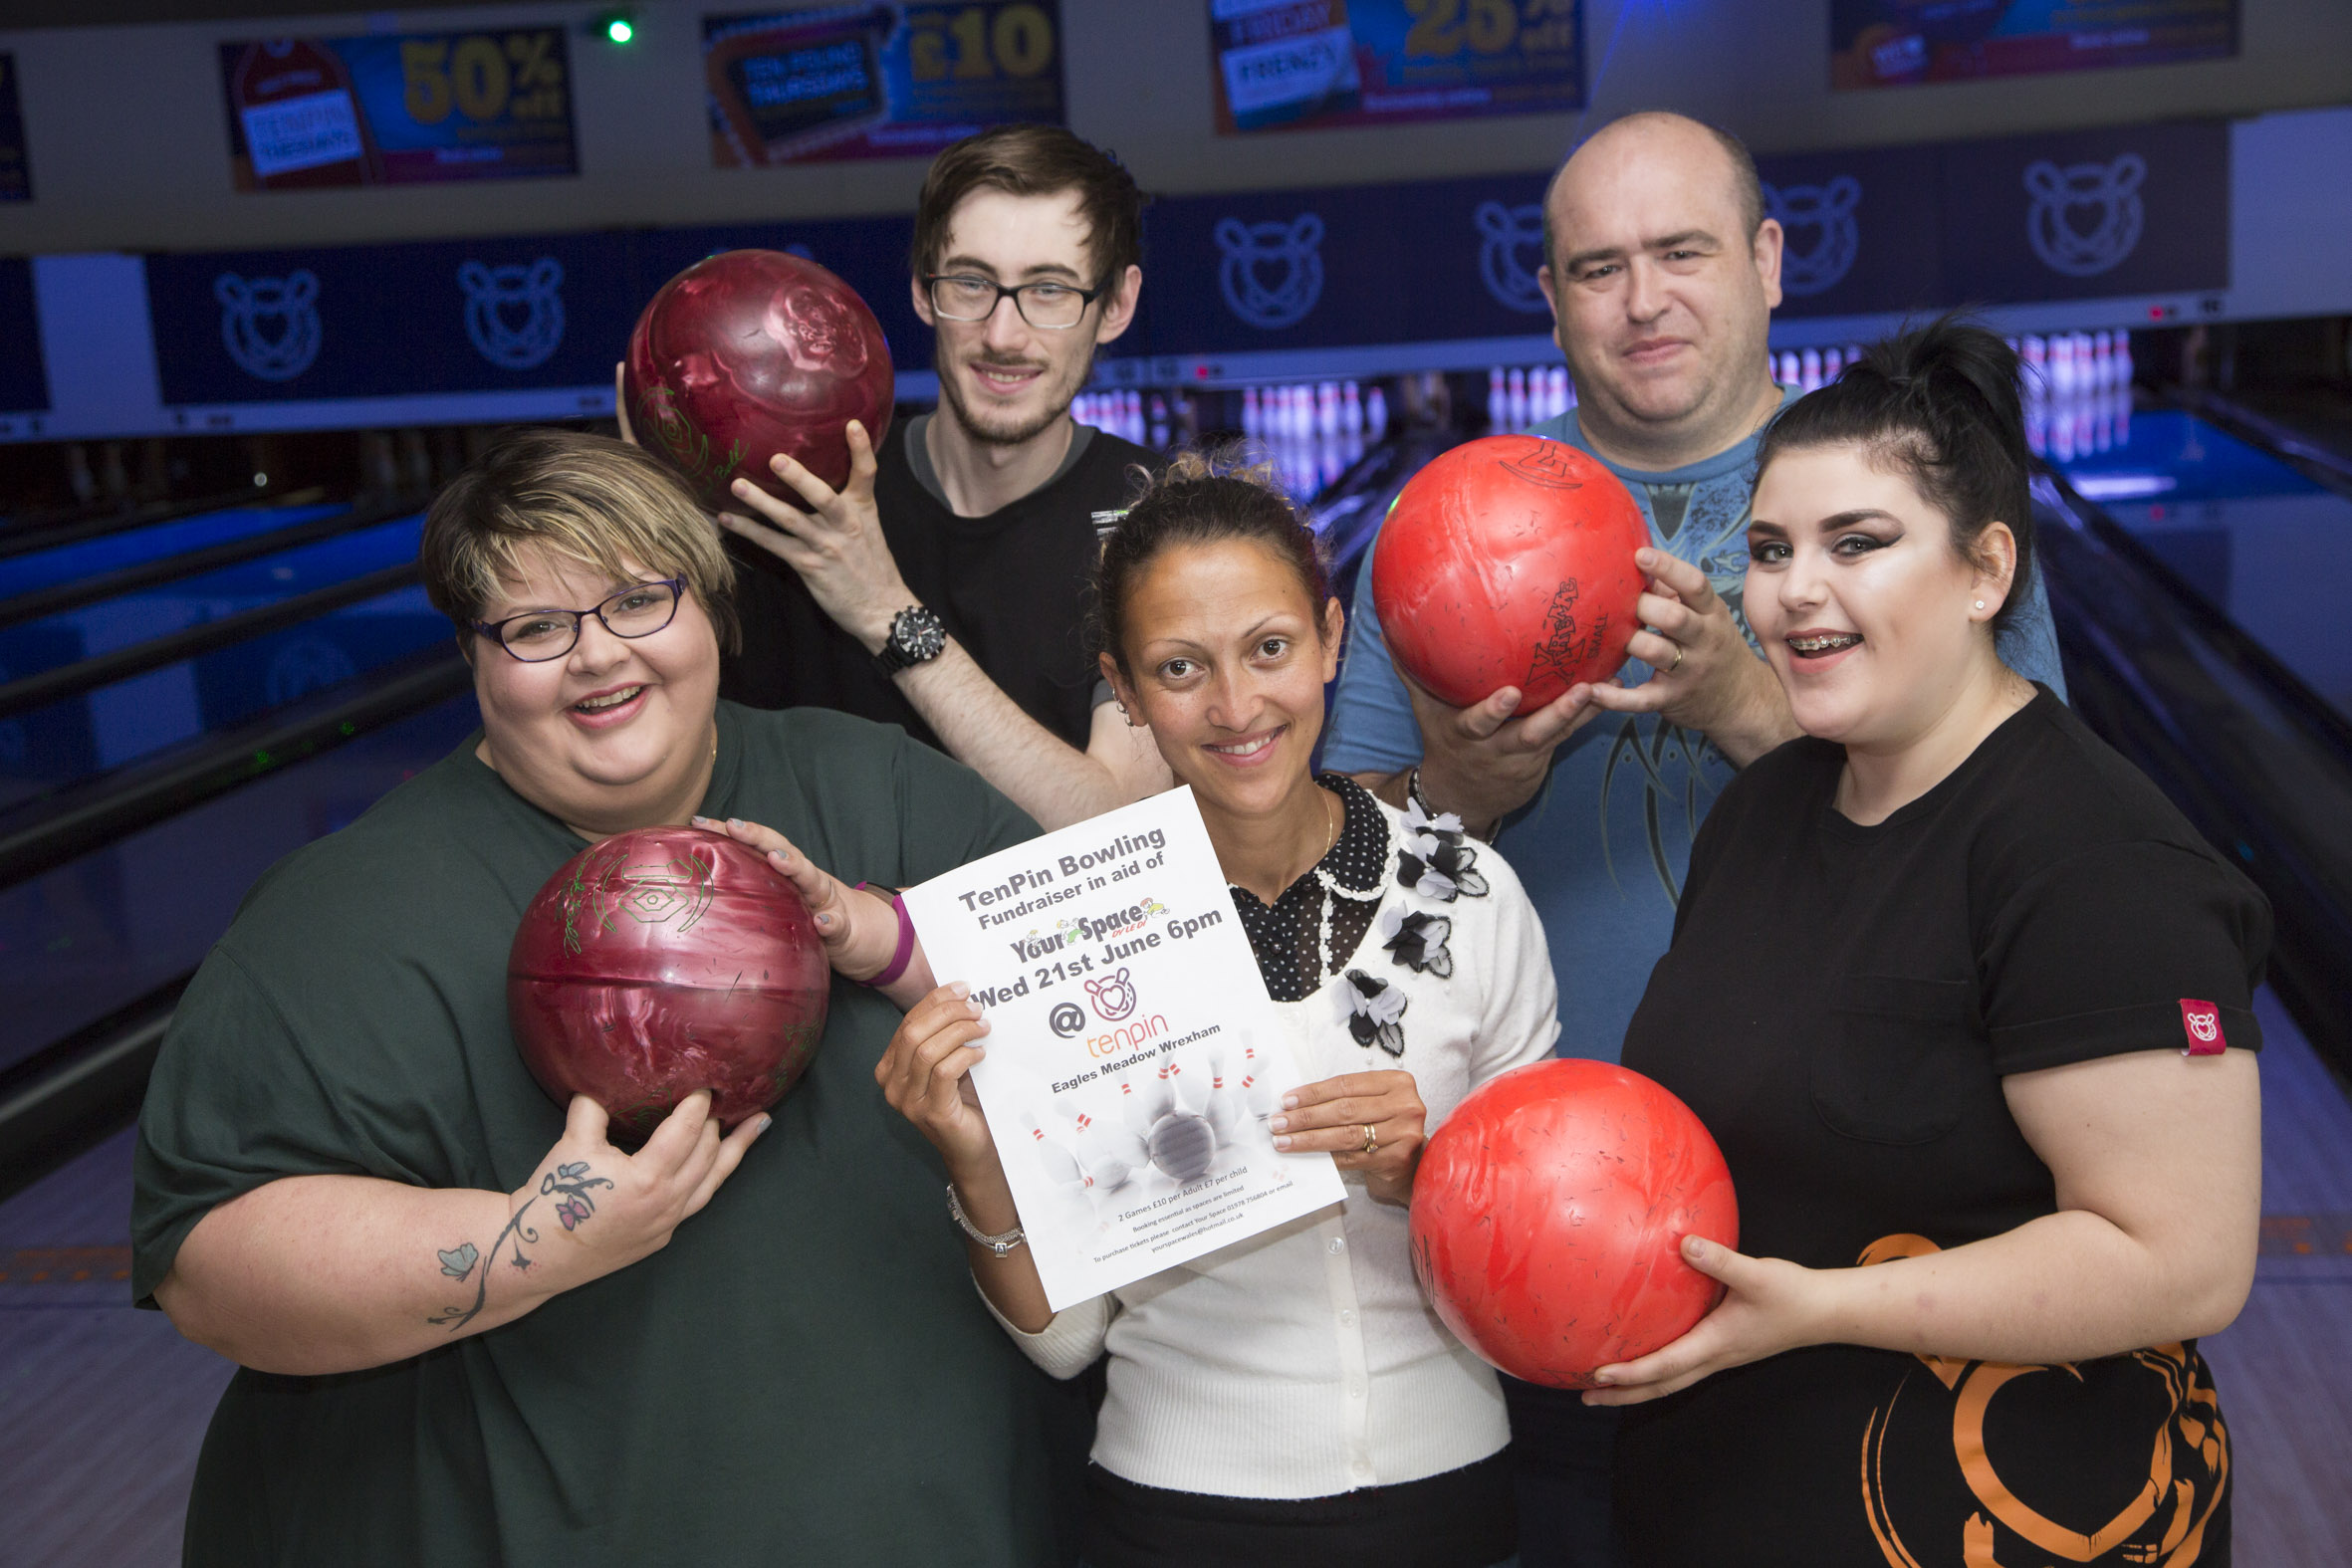 Tenpin bowling puts Wrexham charity for autistic youngsters in the frame